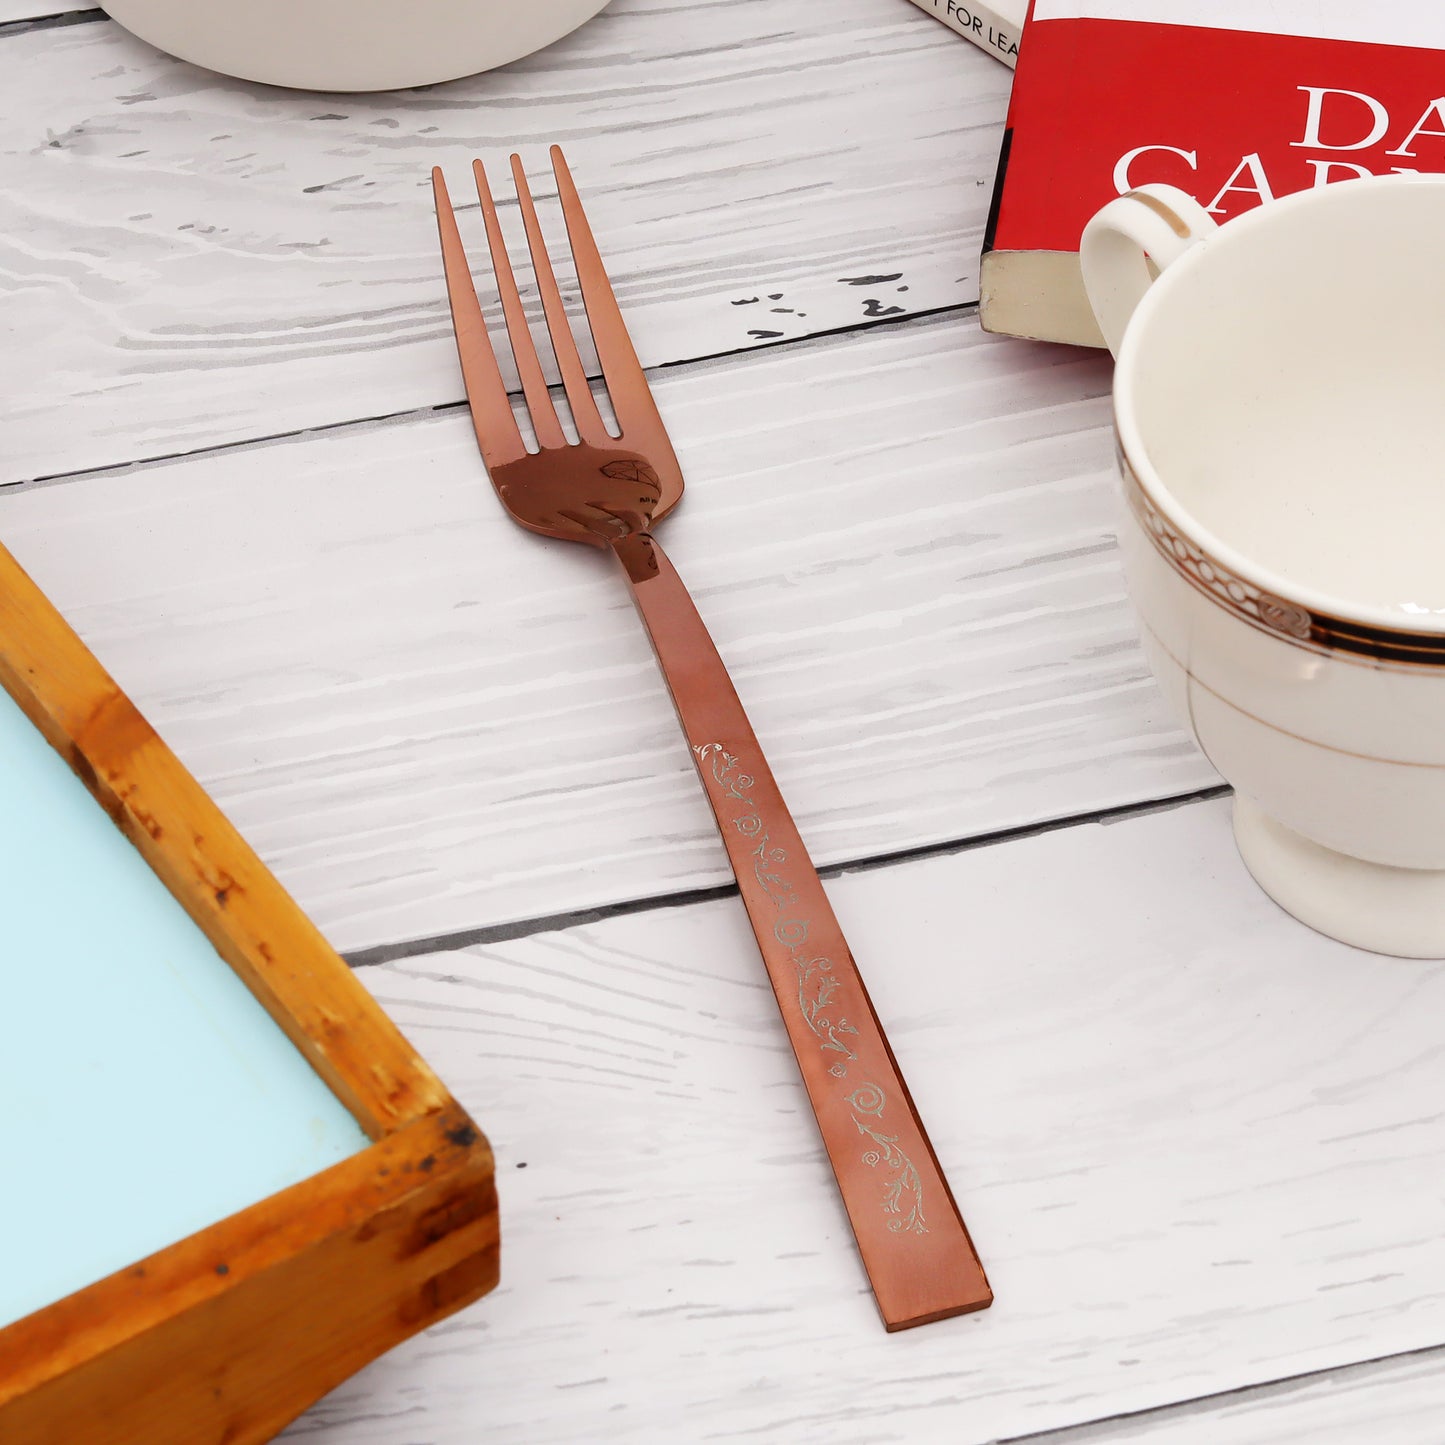 Elegant cutlery fork set by Swasha - redefine dining with timeless style